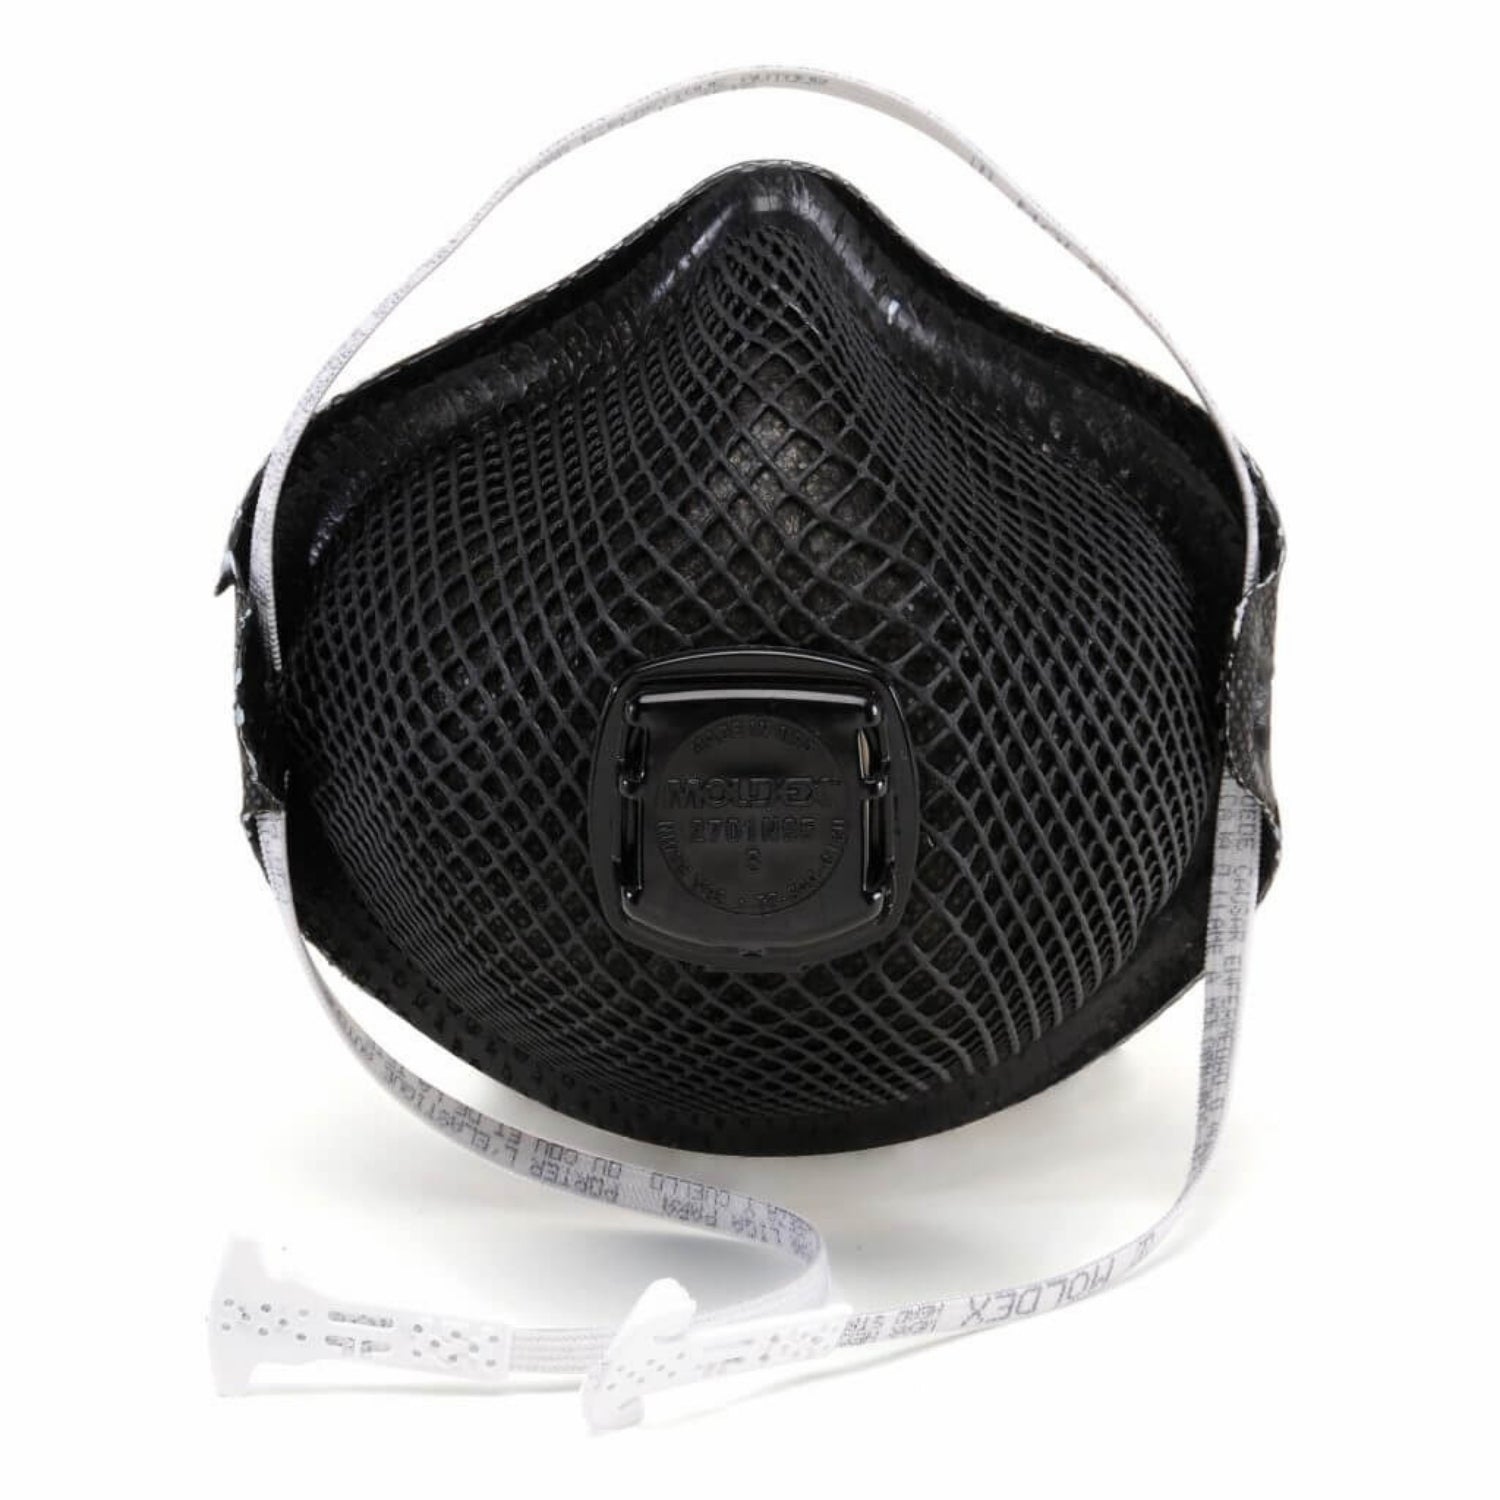 MOLDEX M2700 - Special Ops™ Series HandyStrap® N95 Particulate Respirator, Non-Oil Based Particulates, M/L - 10/BOX